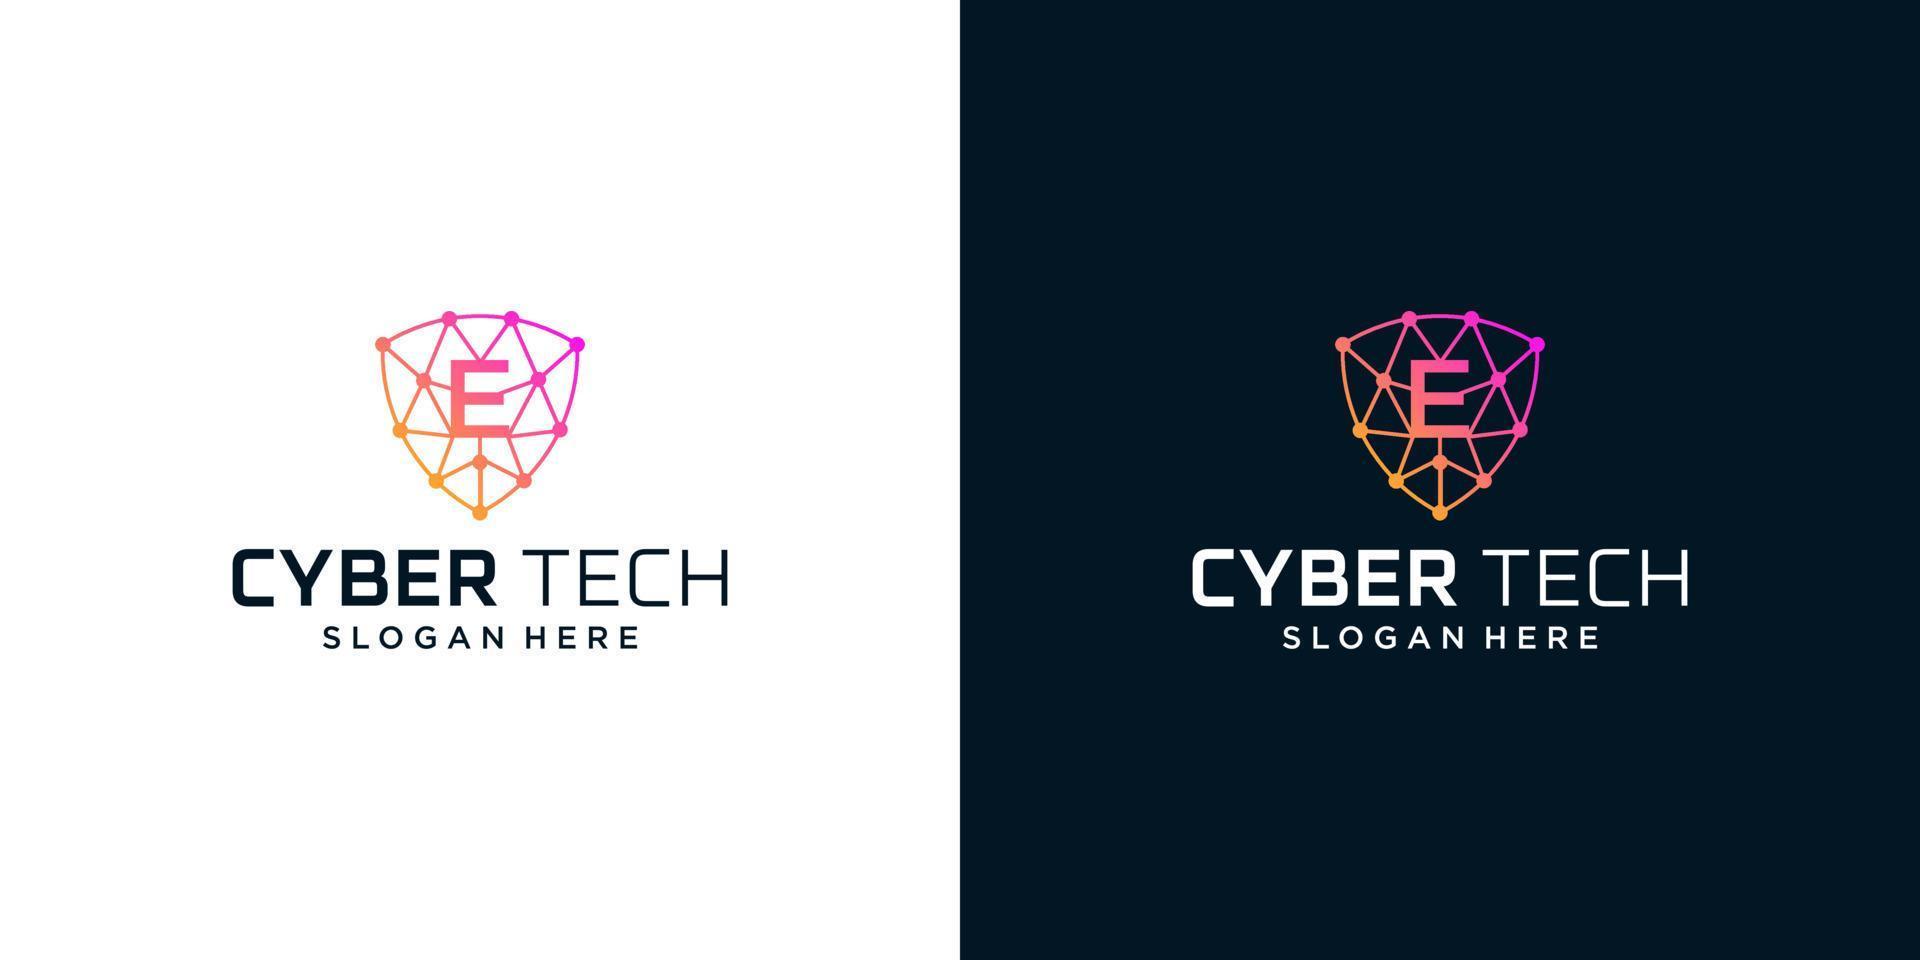 Cyber tech logo design template with initial letter E graphic design vector illustration. Symbol for tech, security, internet, system, Artificial Intelligence and computer.